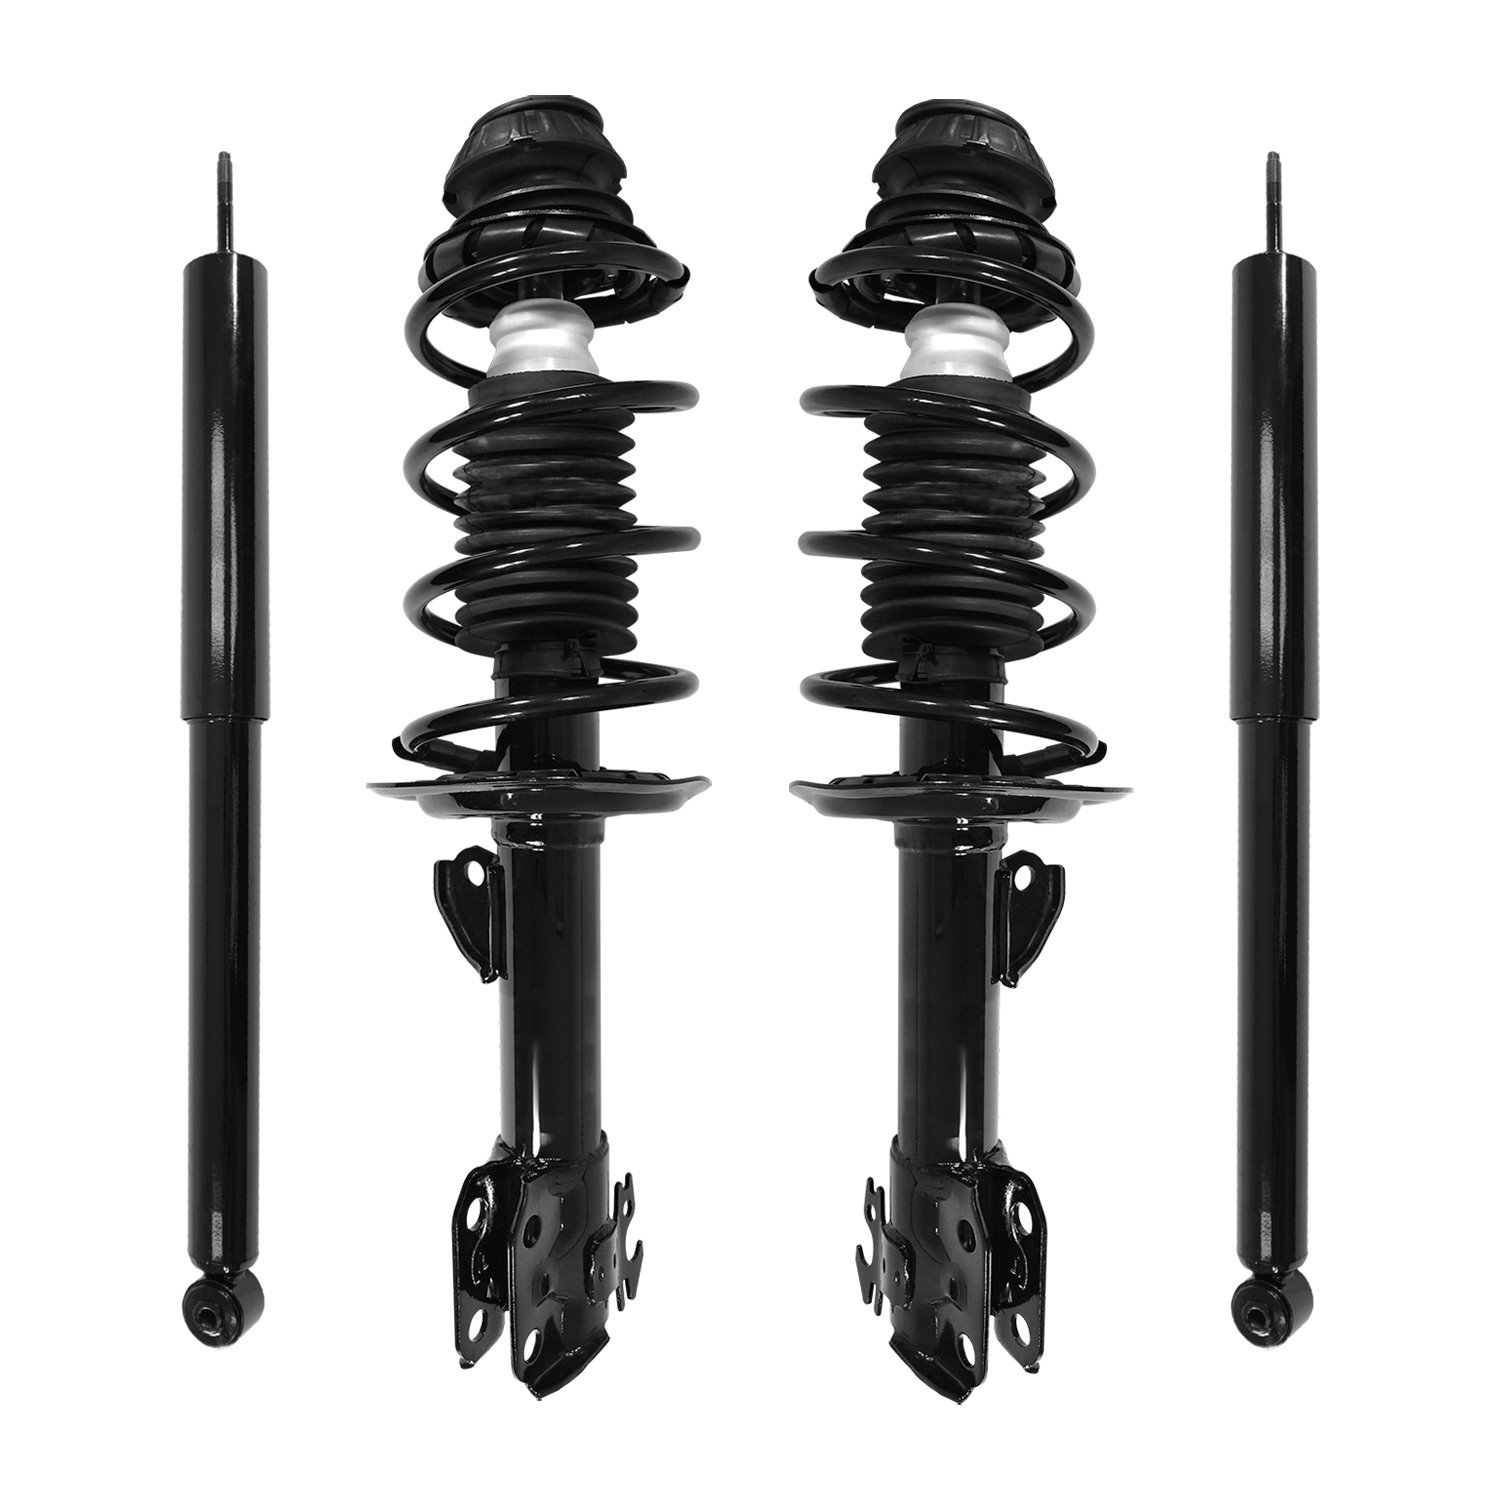 4-11805-254130-001 Front & Rear Suspension Strut & Coil Spring Assembly Fits Select Toyota Yaris